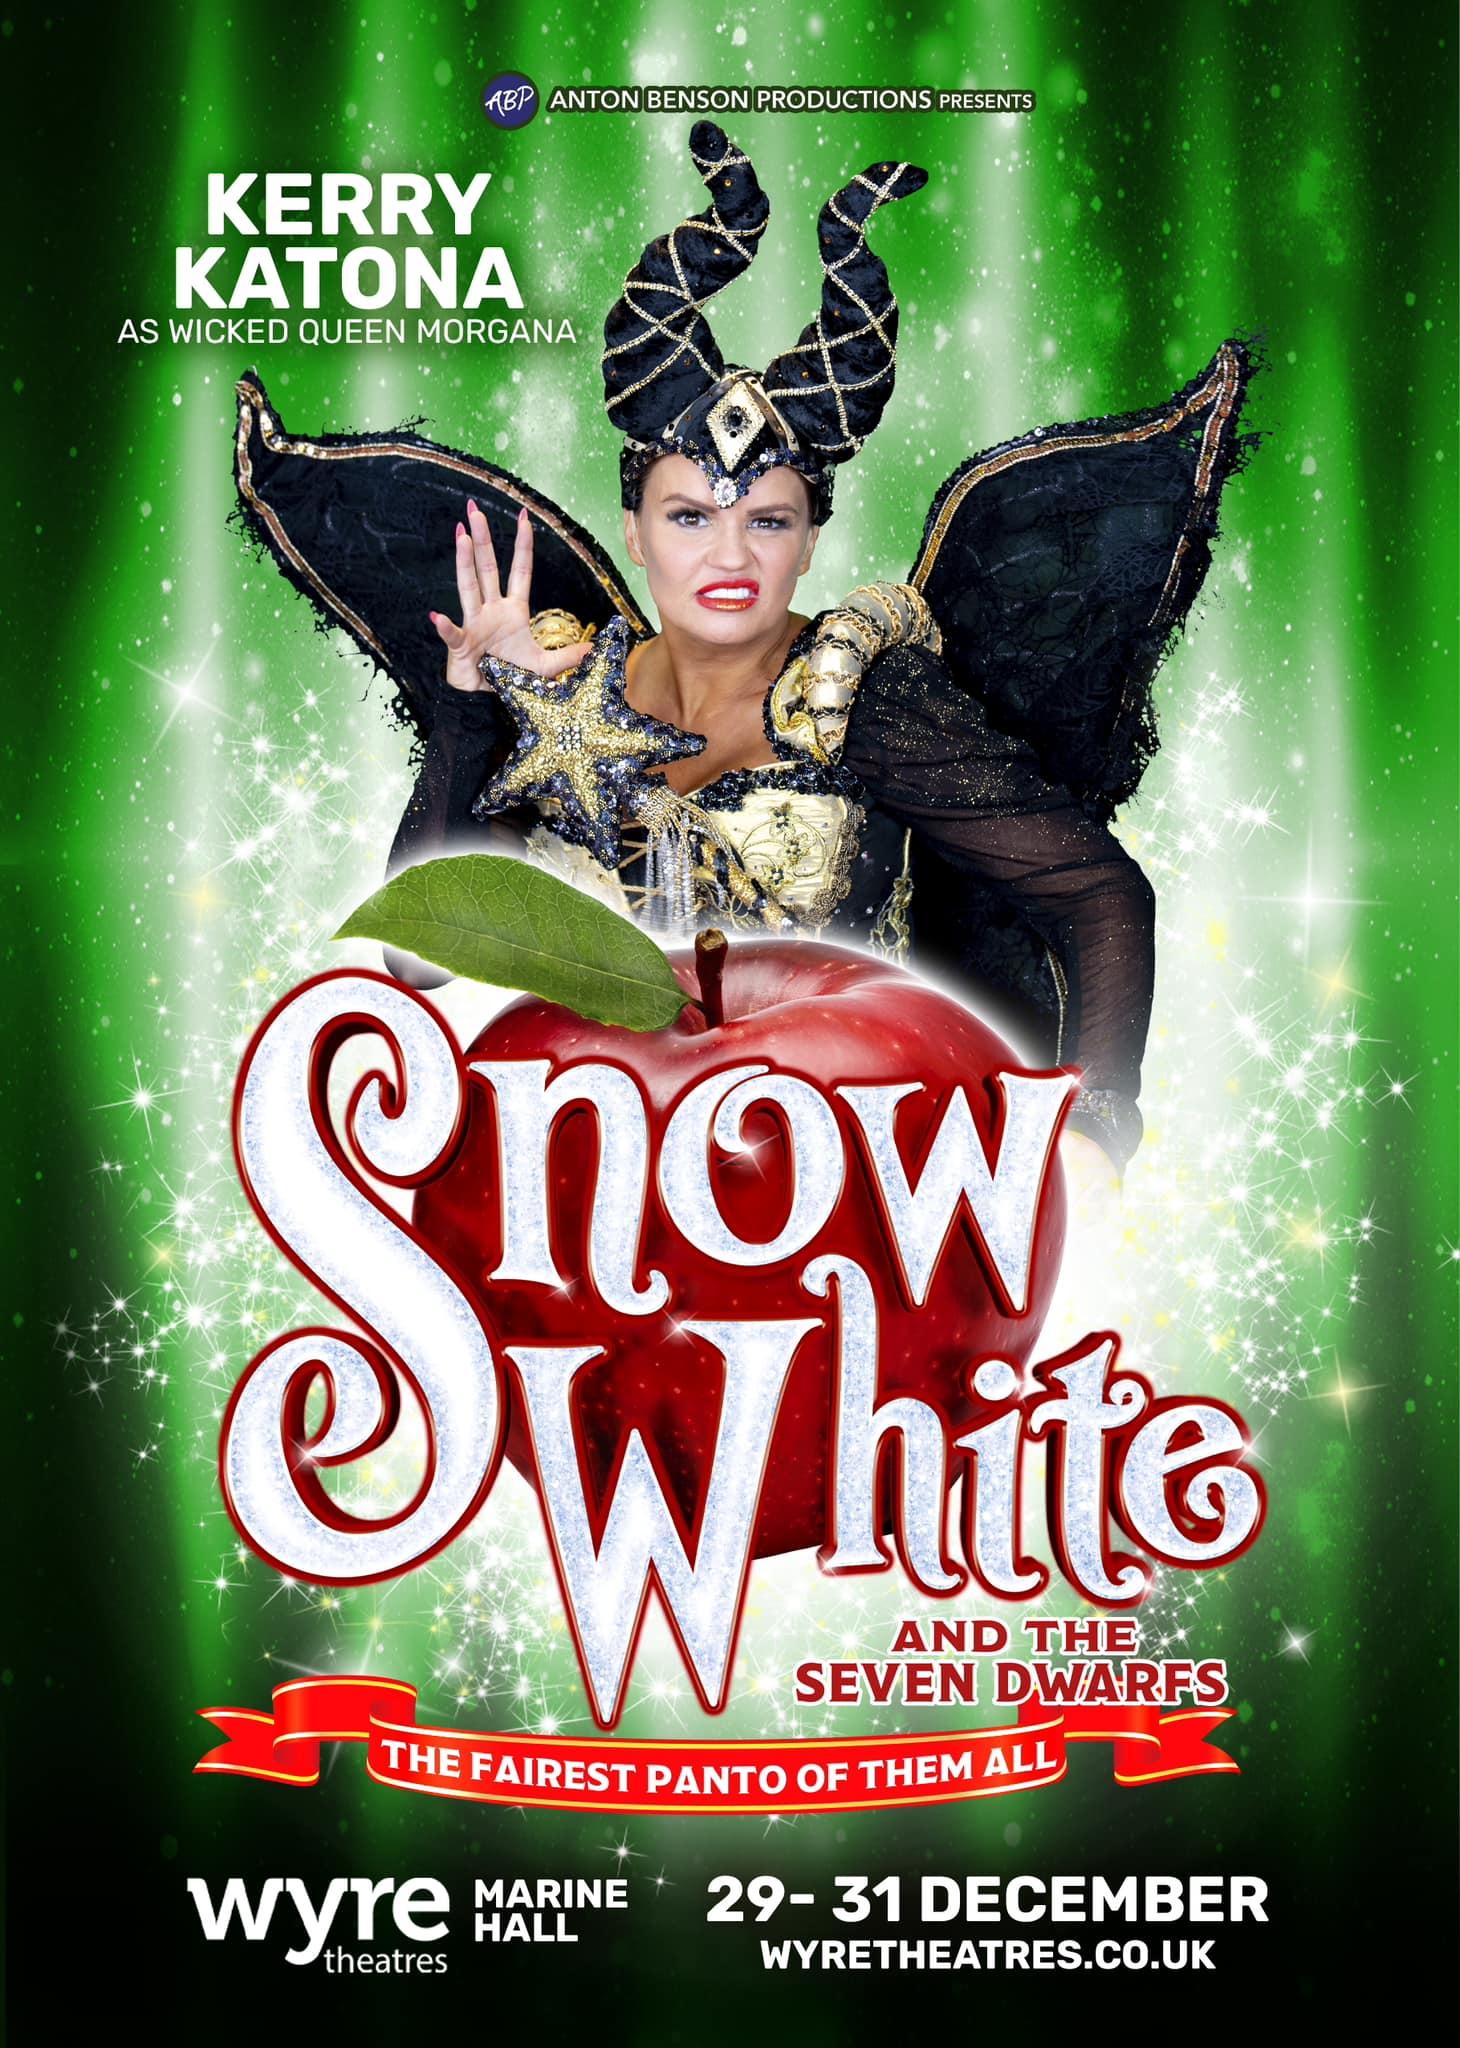 Poster showing Kerry Katona as wicked queen Morgana in Snow White and the Seven Dwarfs.